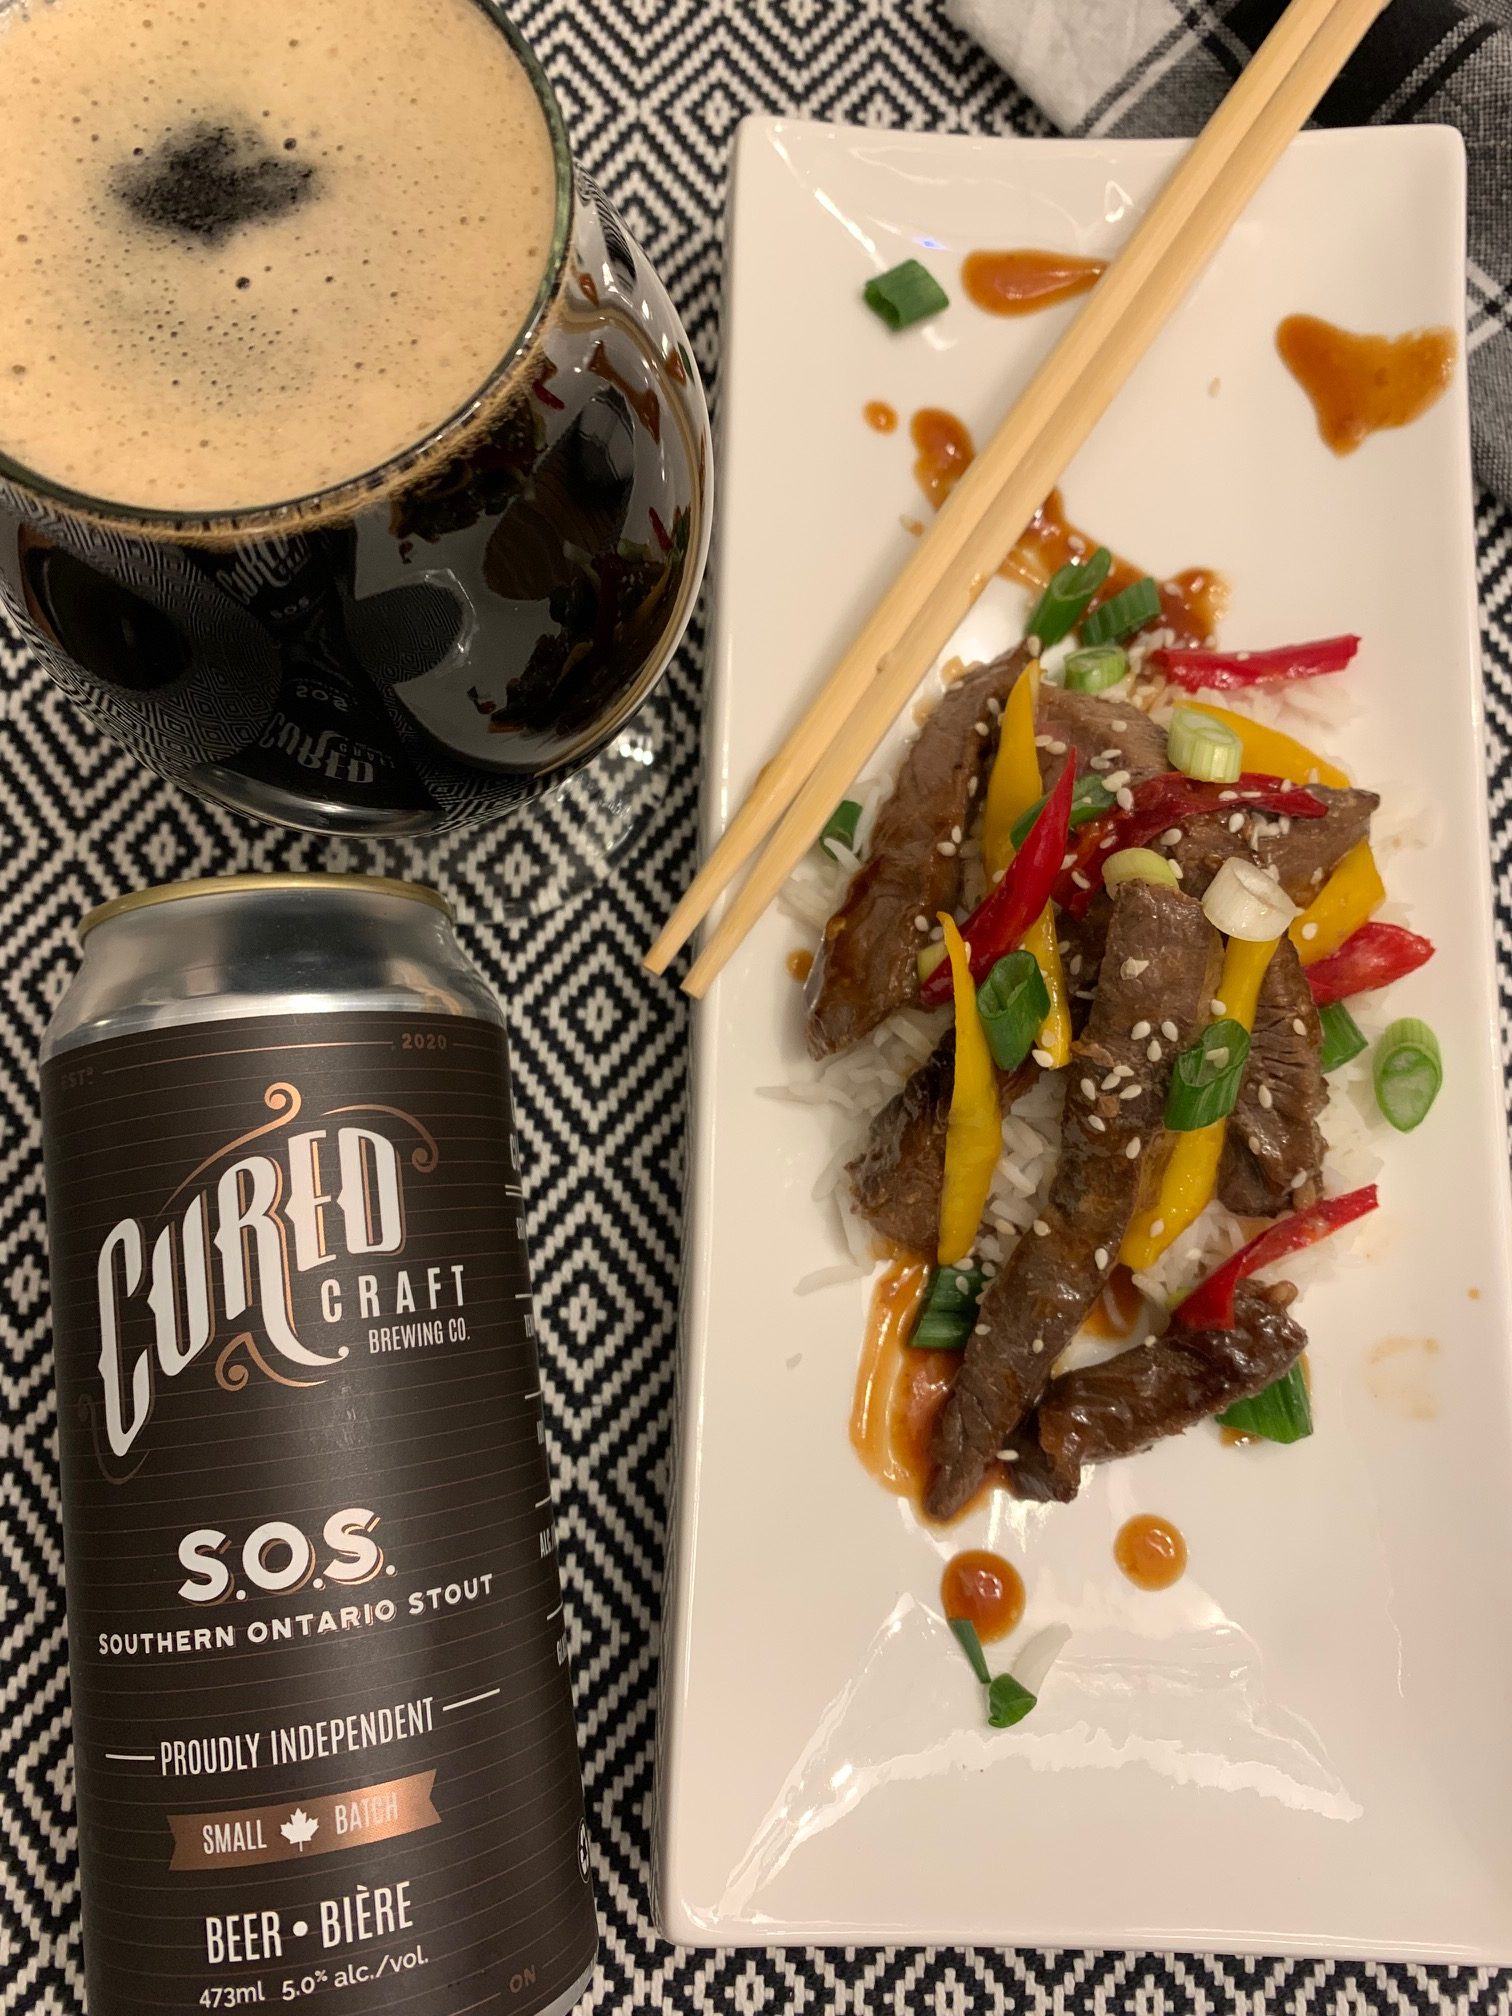 Featured image for “Cured Craft Brewing Co. S.O.S. Oatmeal Stout with Spicy Beef Szechuan.”